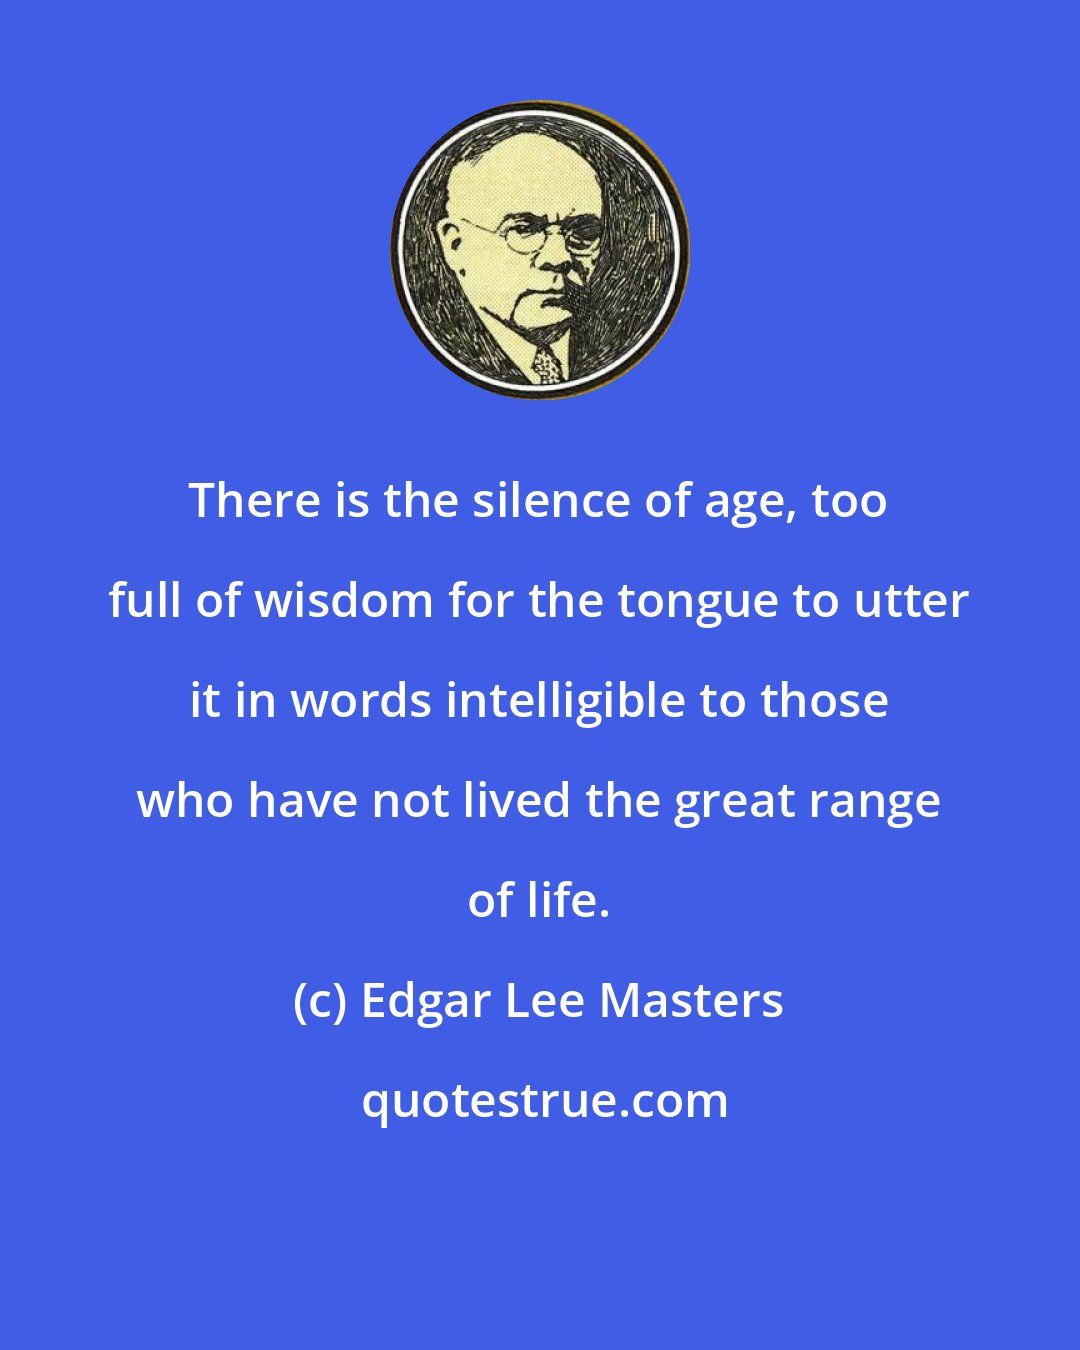 Edgar Lee Masters: There is the silence of age, too full of wisdom for the tongue to utter it in words intelligible to those who have not lived the great range of life.